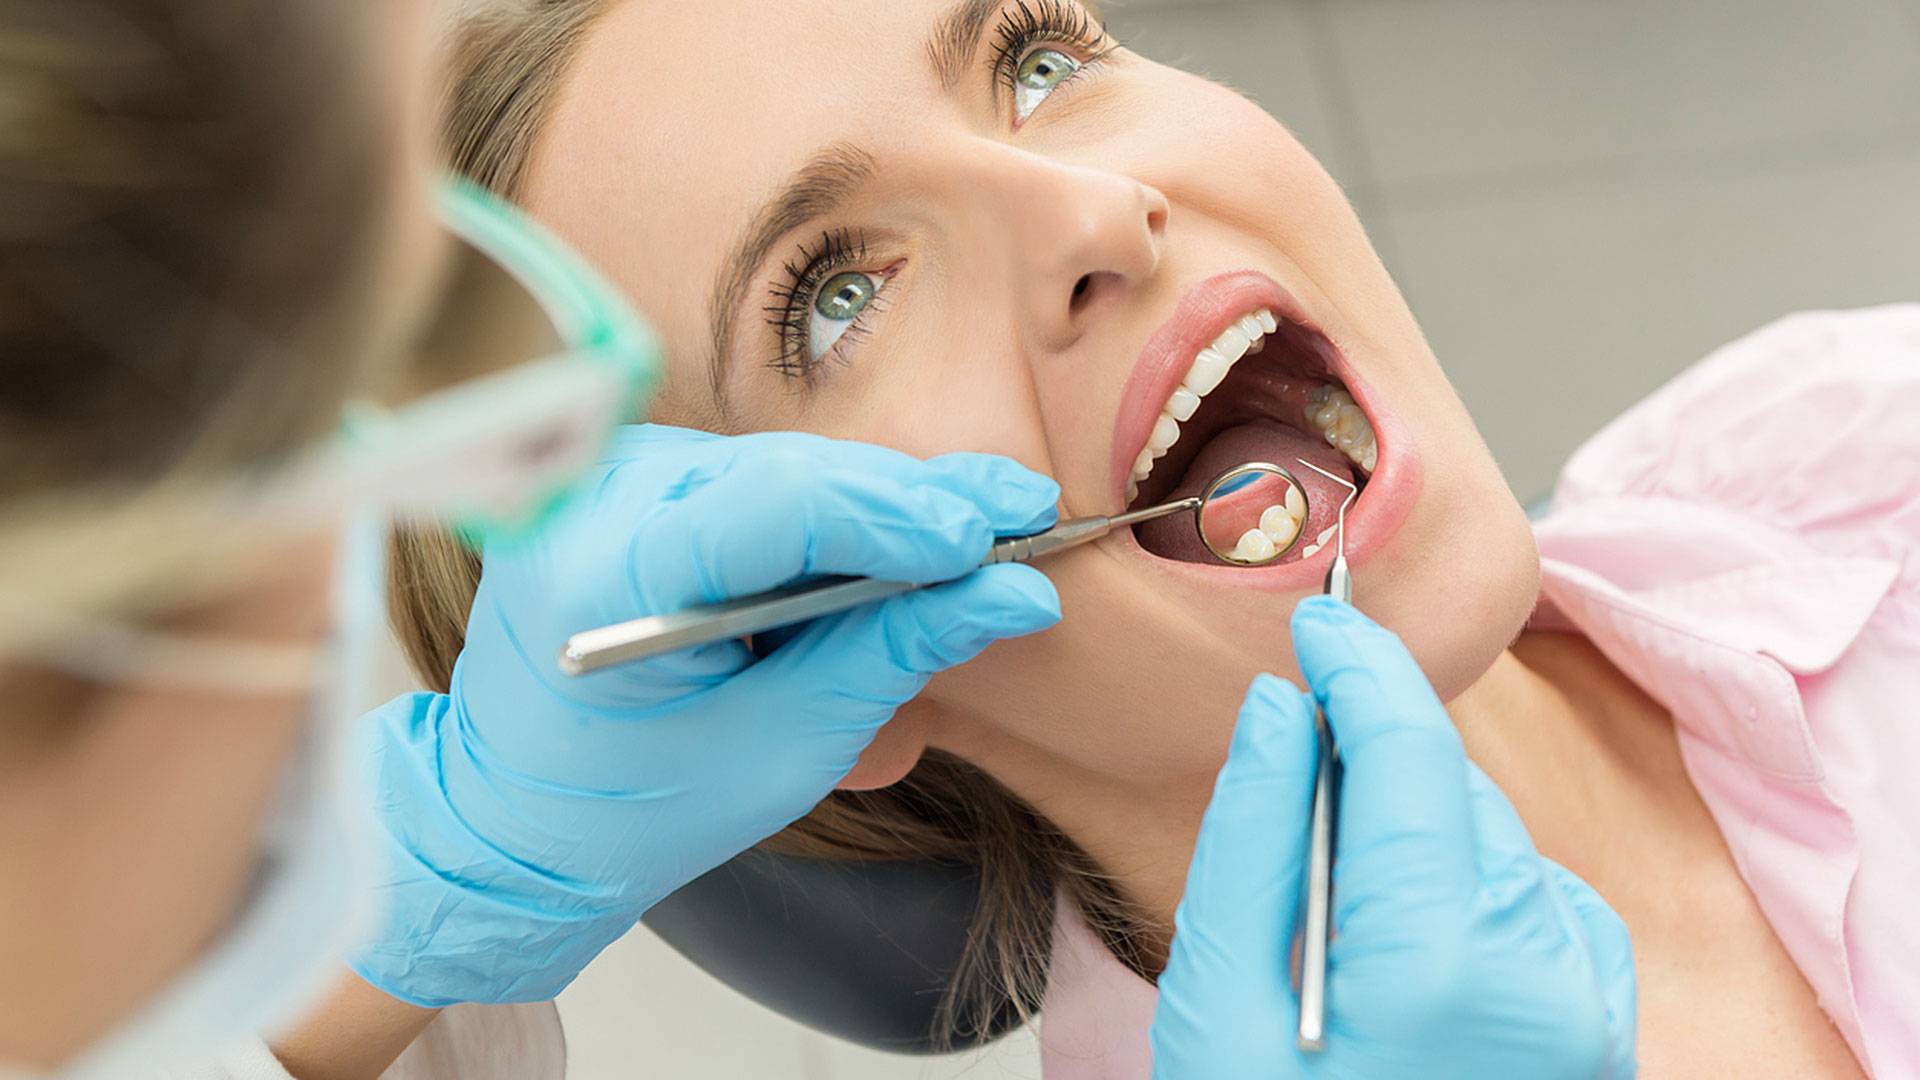 Areas A Dental Crown Procedure Can Benefit Your Oral Health